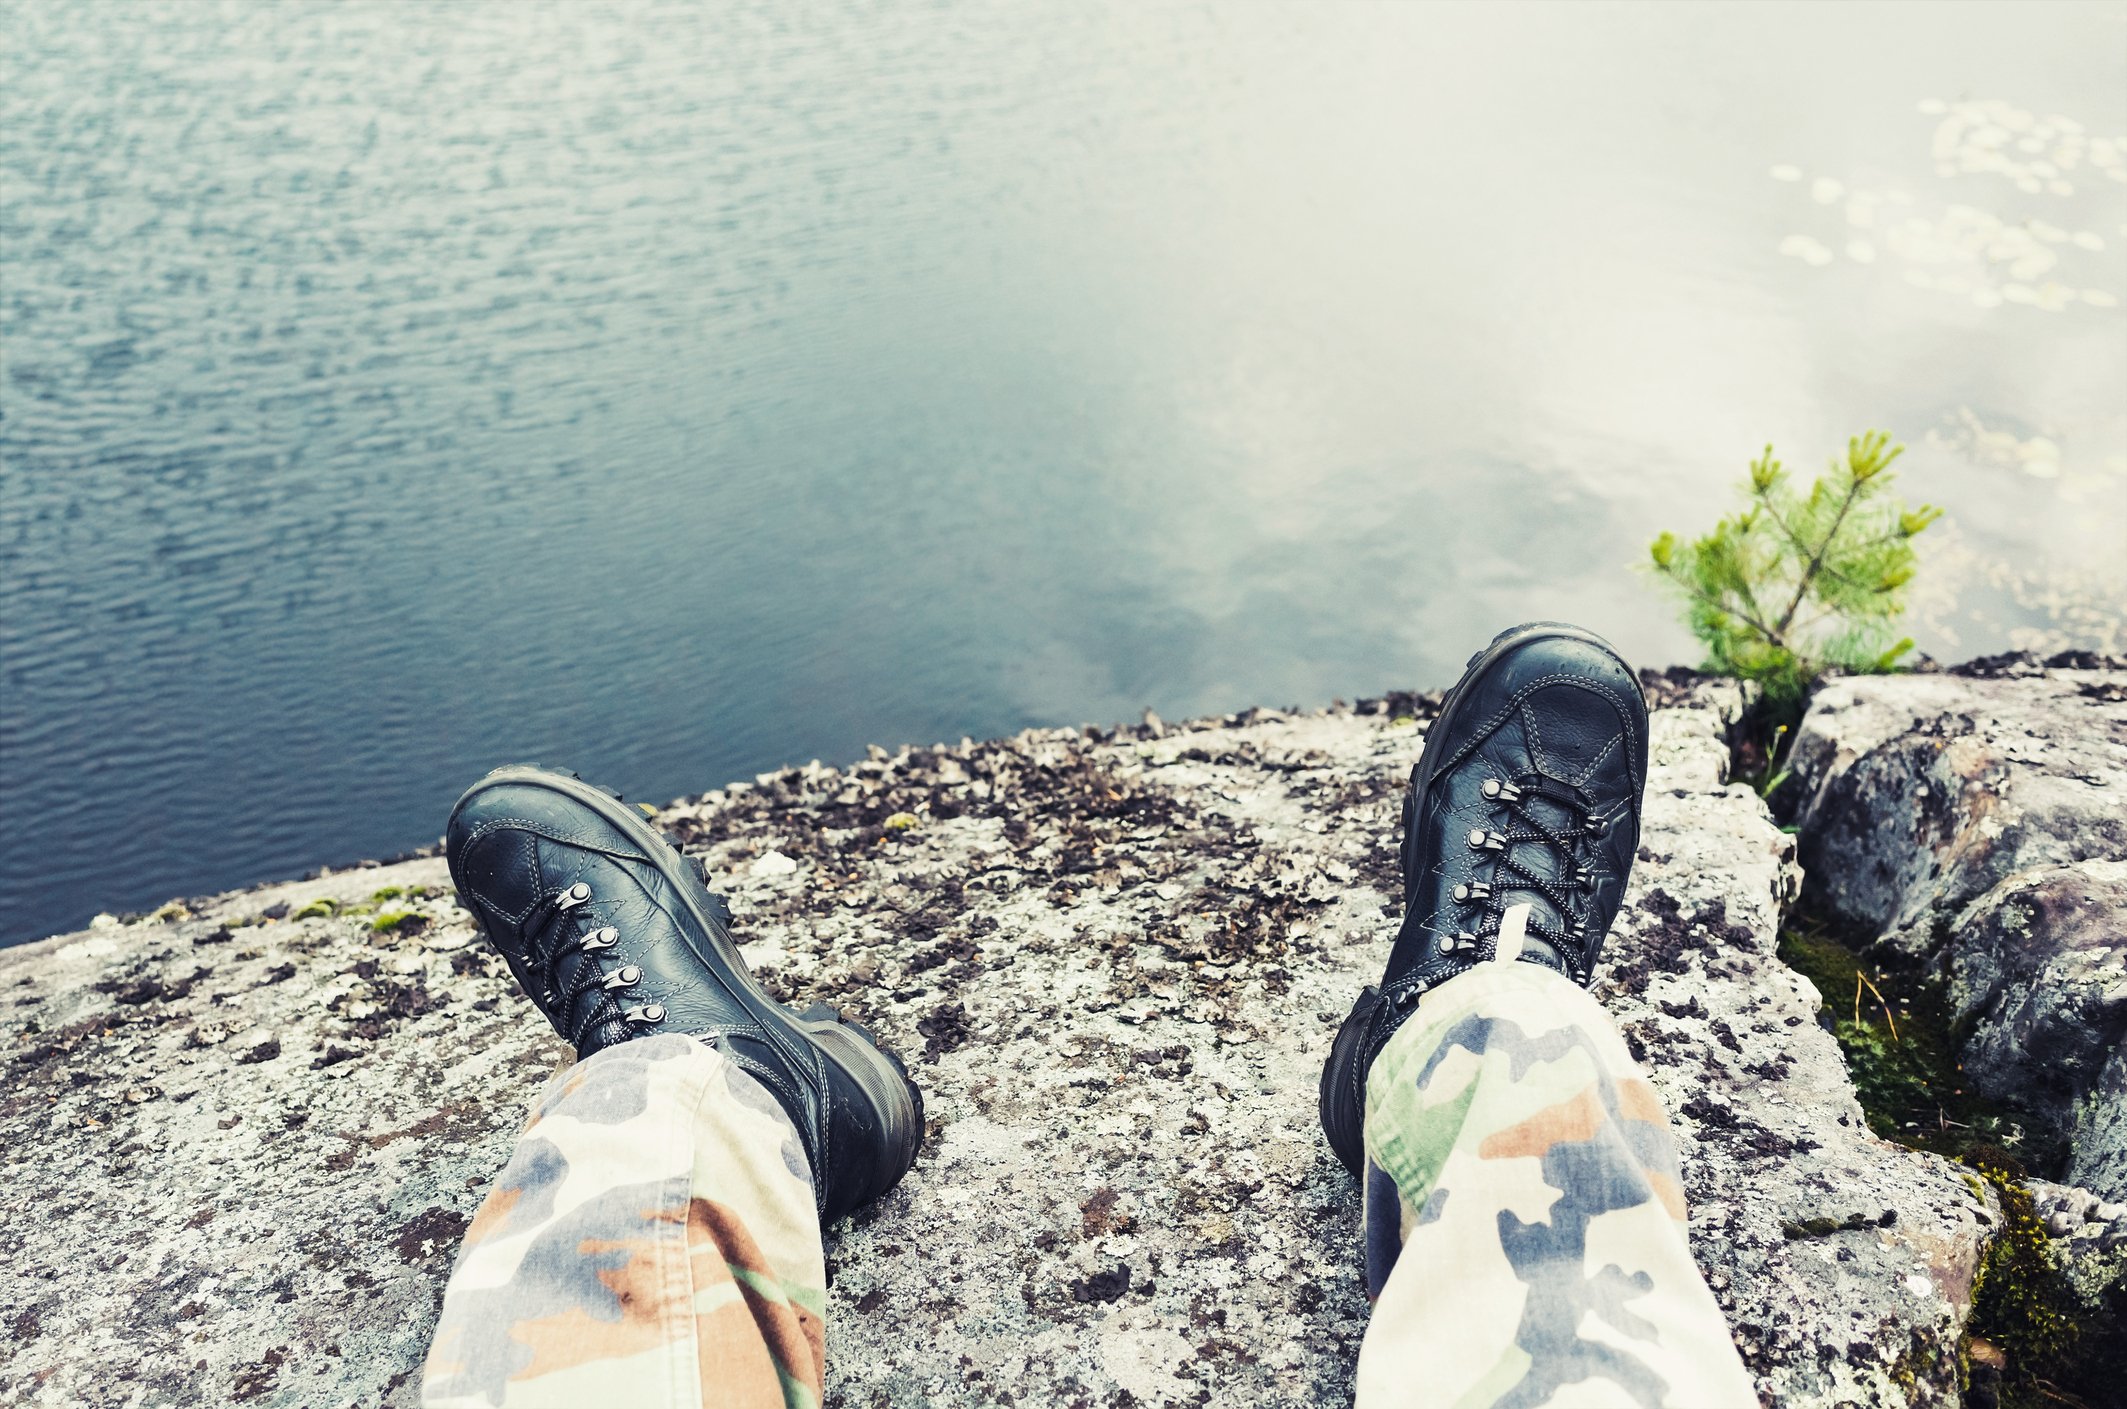 Two legs in camouflage pants and black boots, sitting near a body of water.